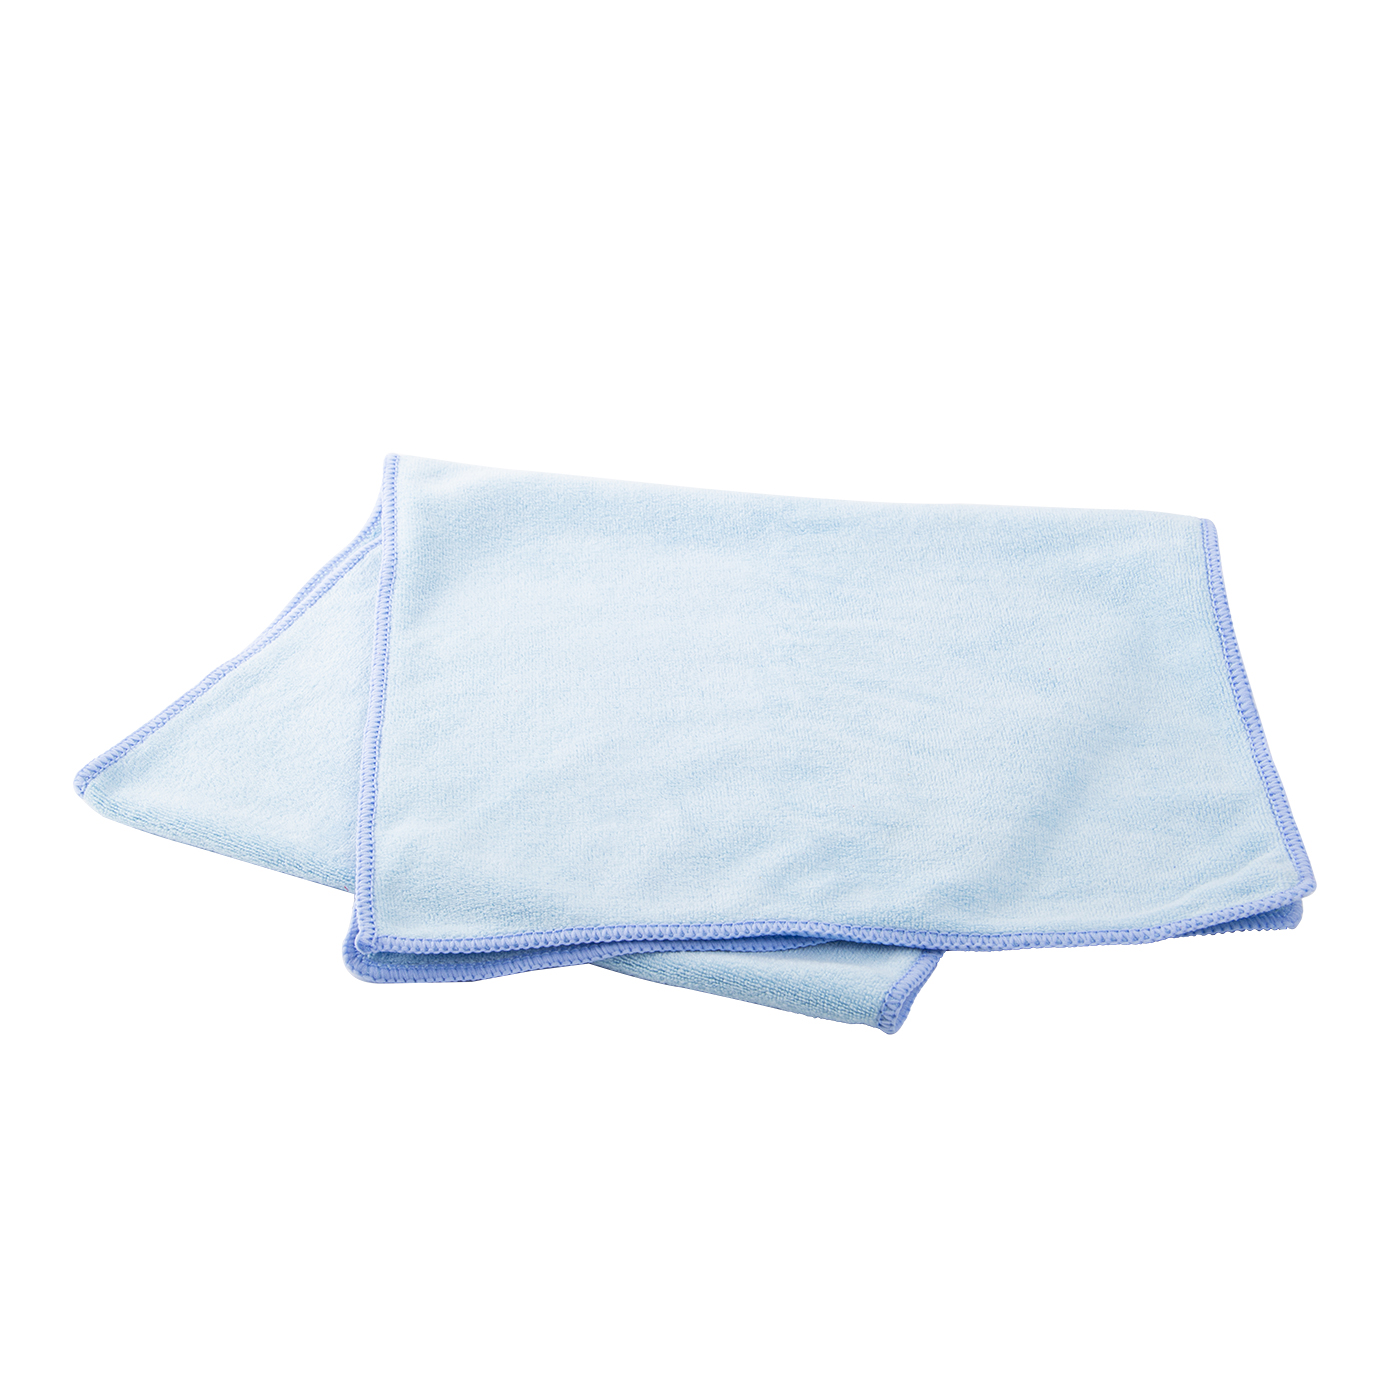 Premium Quick Dry Sports Towel With Mesh Bag2